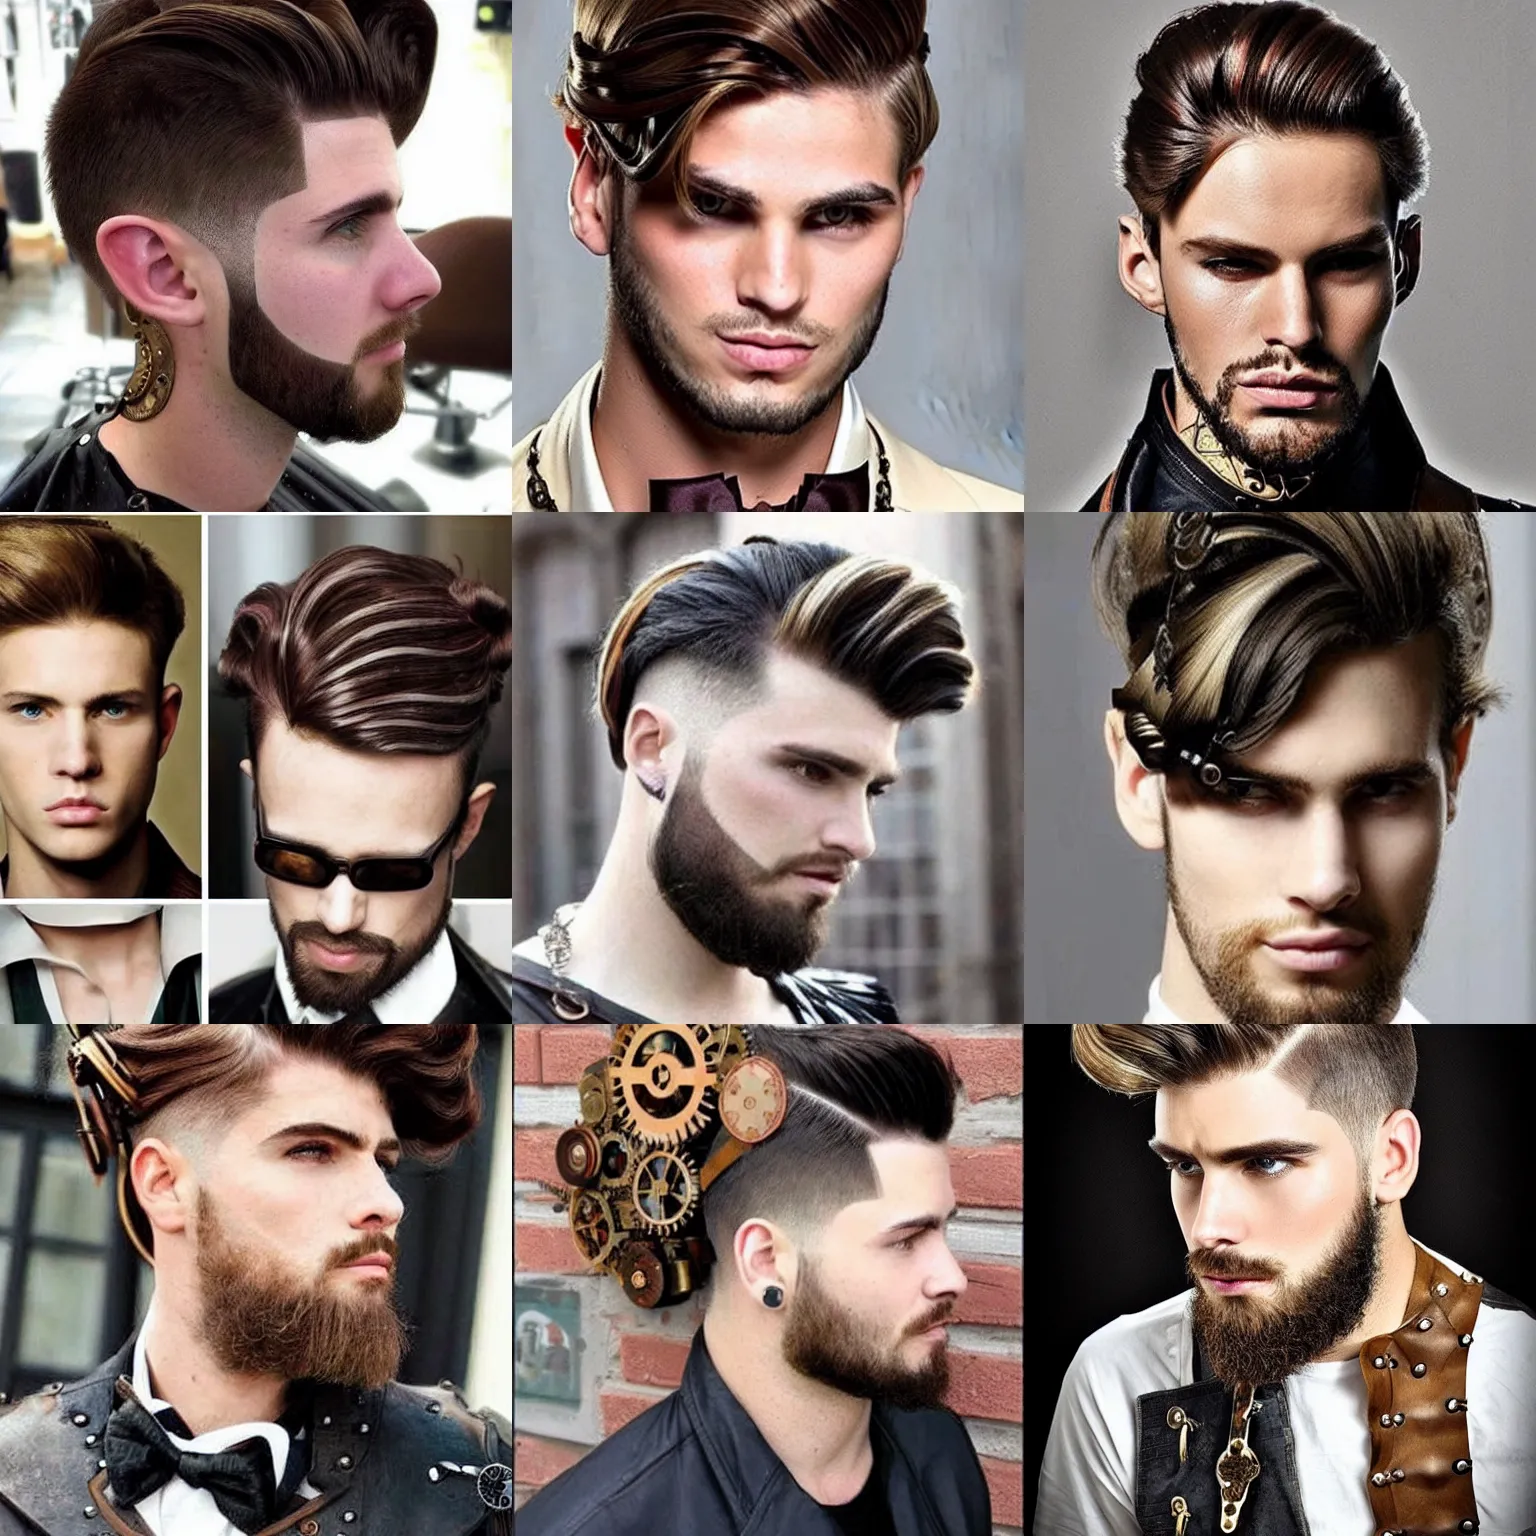 Punky hairstyles for men and women | Bright hair colors